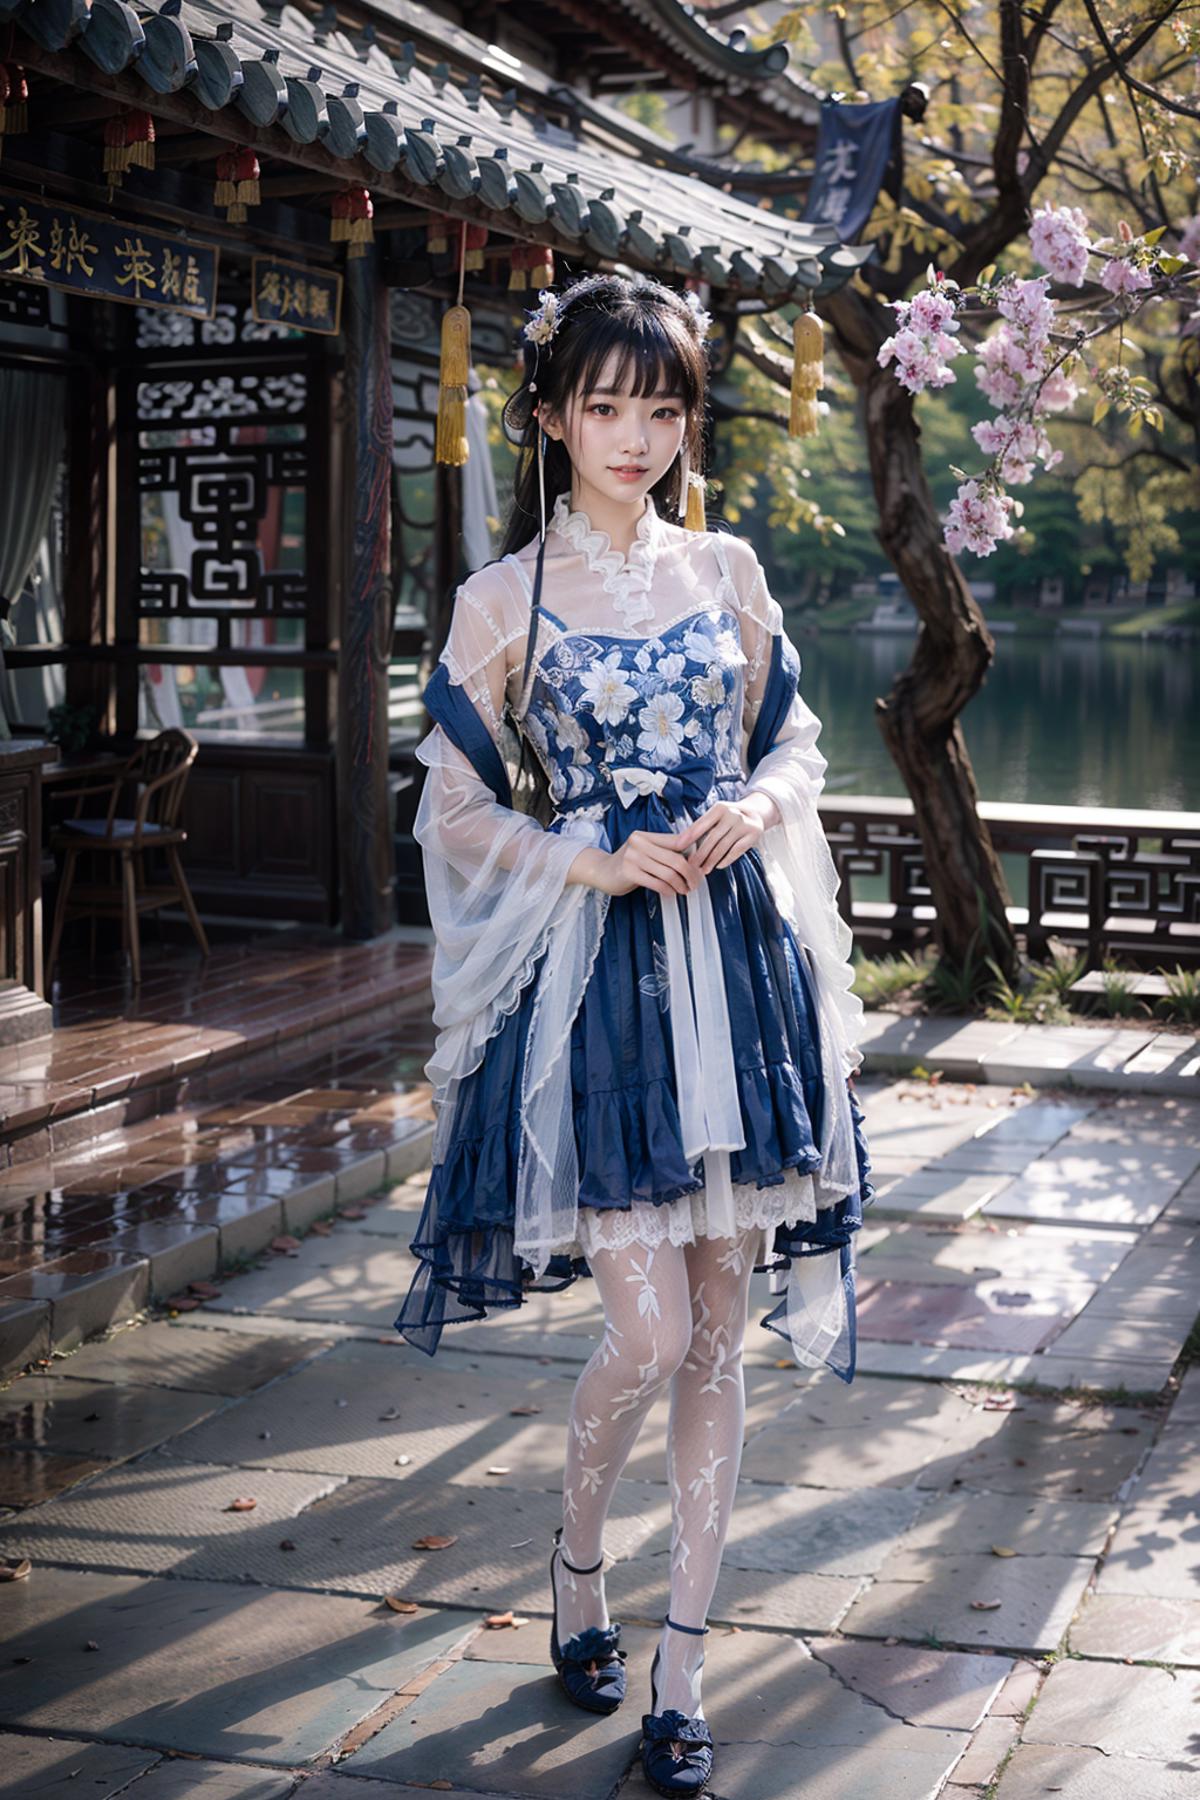 [Realistic] New Chinese-style clothing | 新中式服装 vol.2 image by feetie